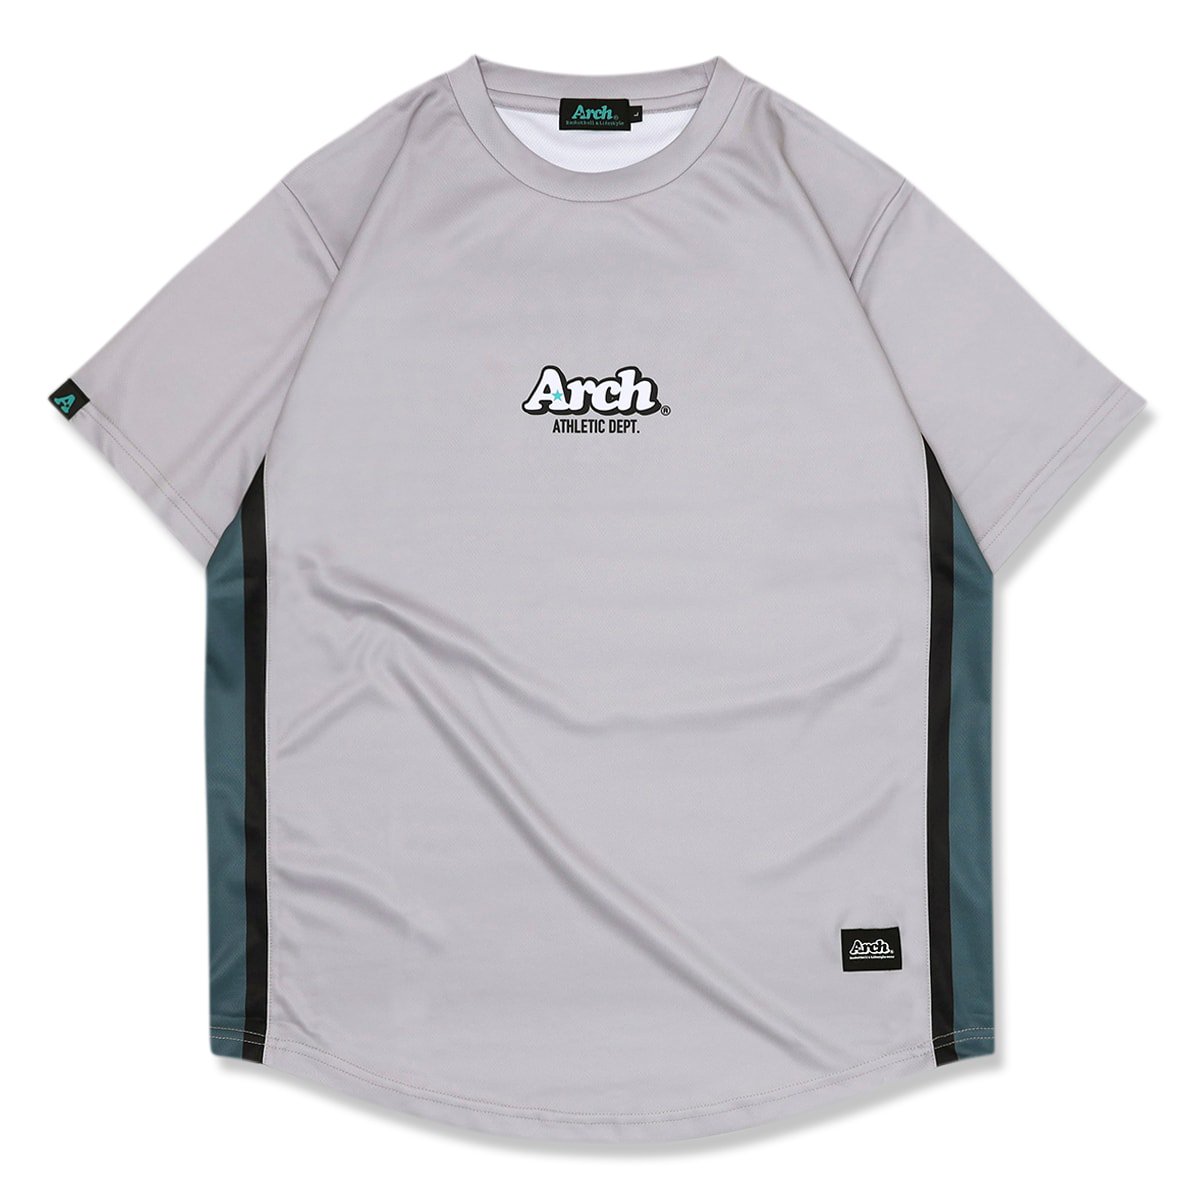 essential athletic tee [DRY]【lilac】 - Arch ☆ アーチ [バスケットボール＆ライフスタイルウェア  Basketball&Lifestyle wear]